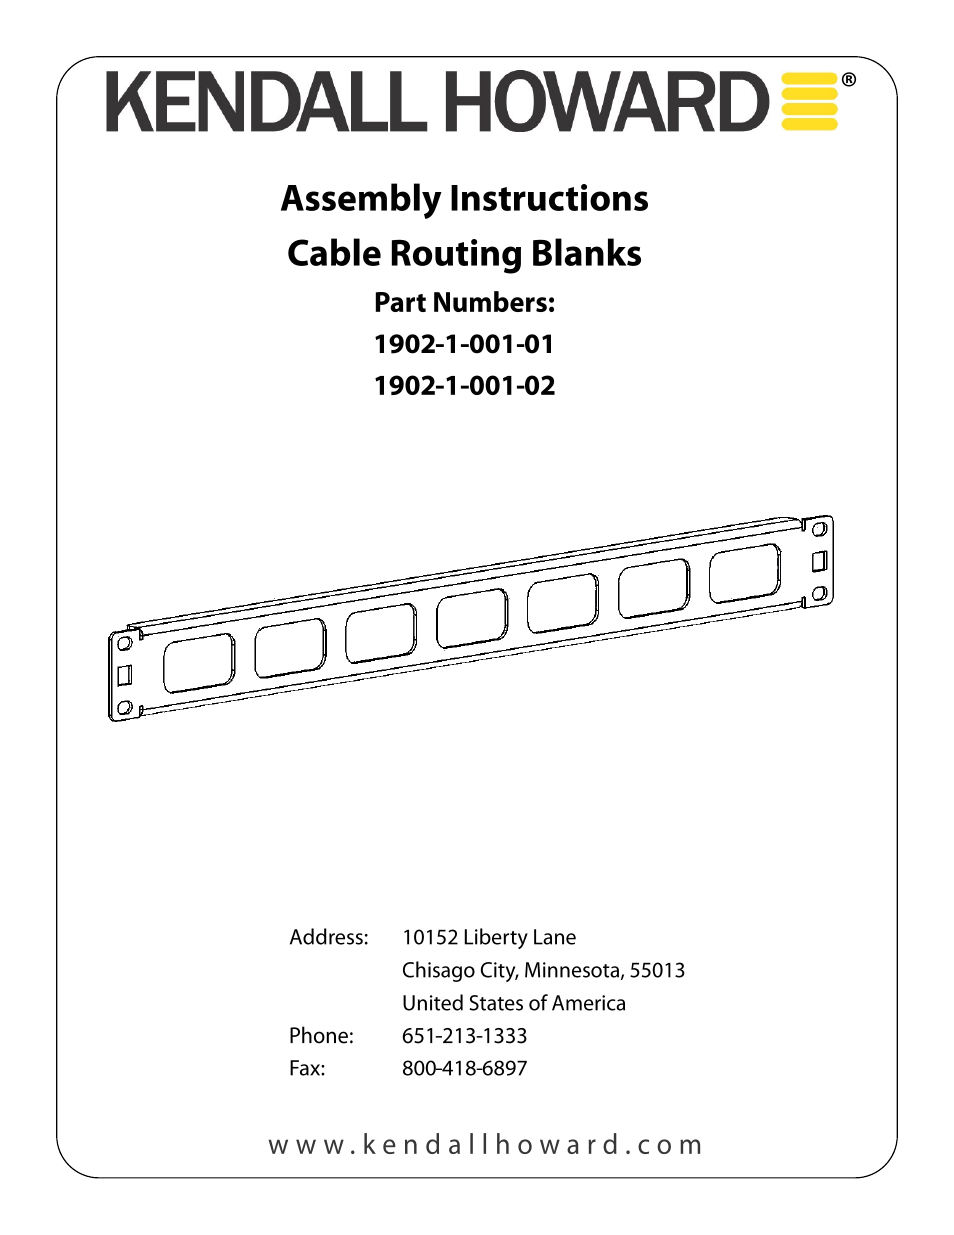 1902-1-001-0x Cable Routing Blank